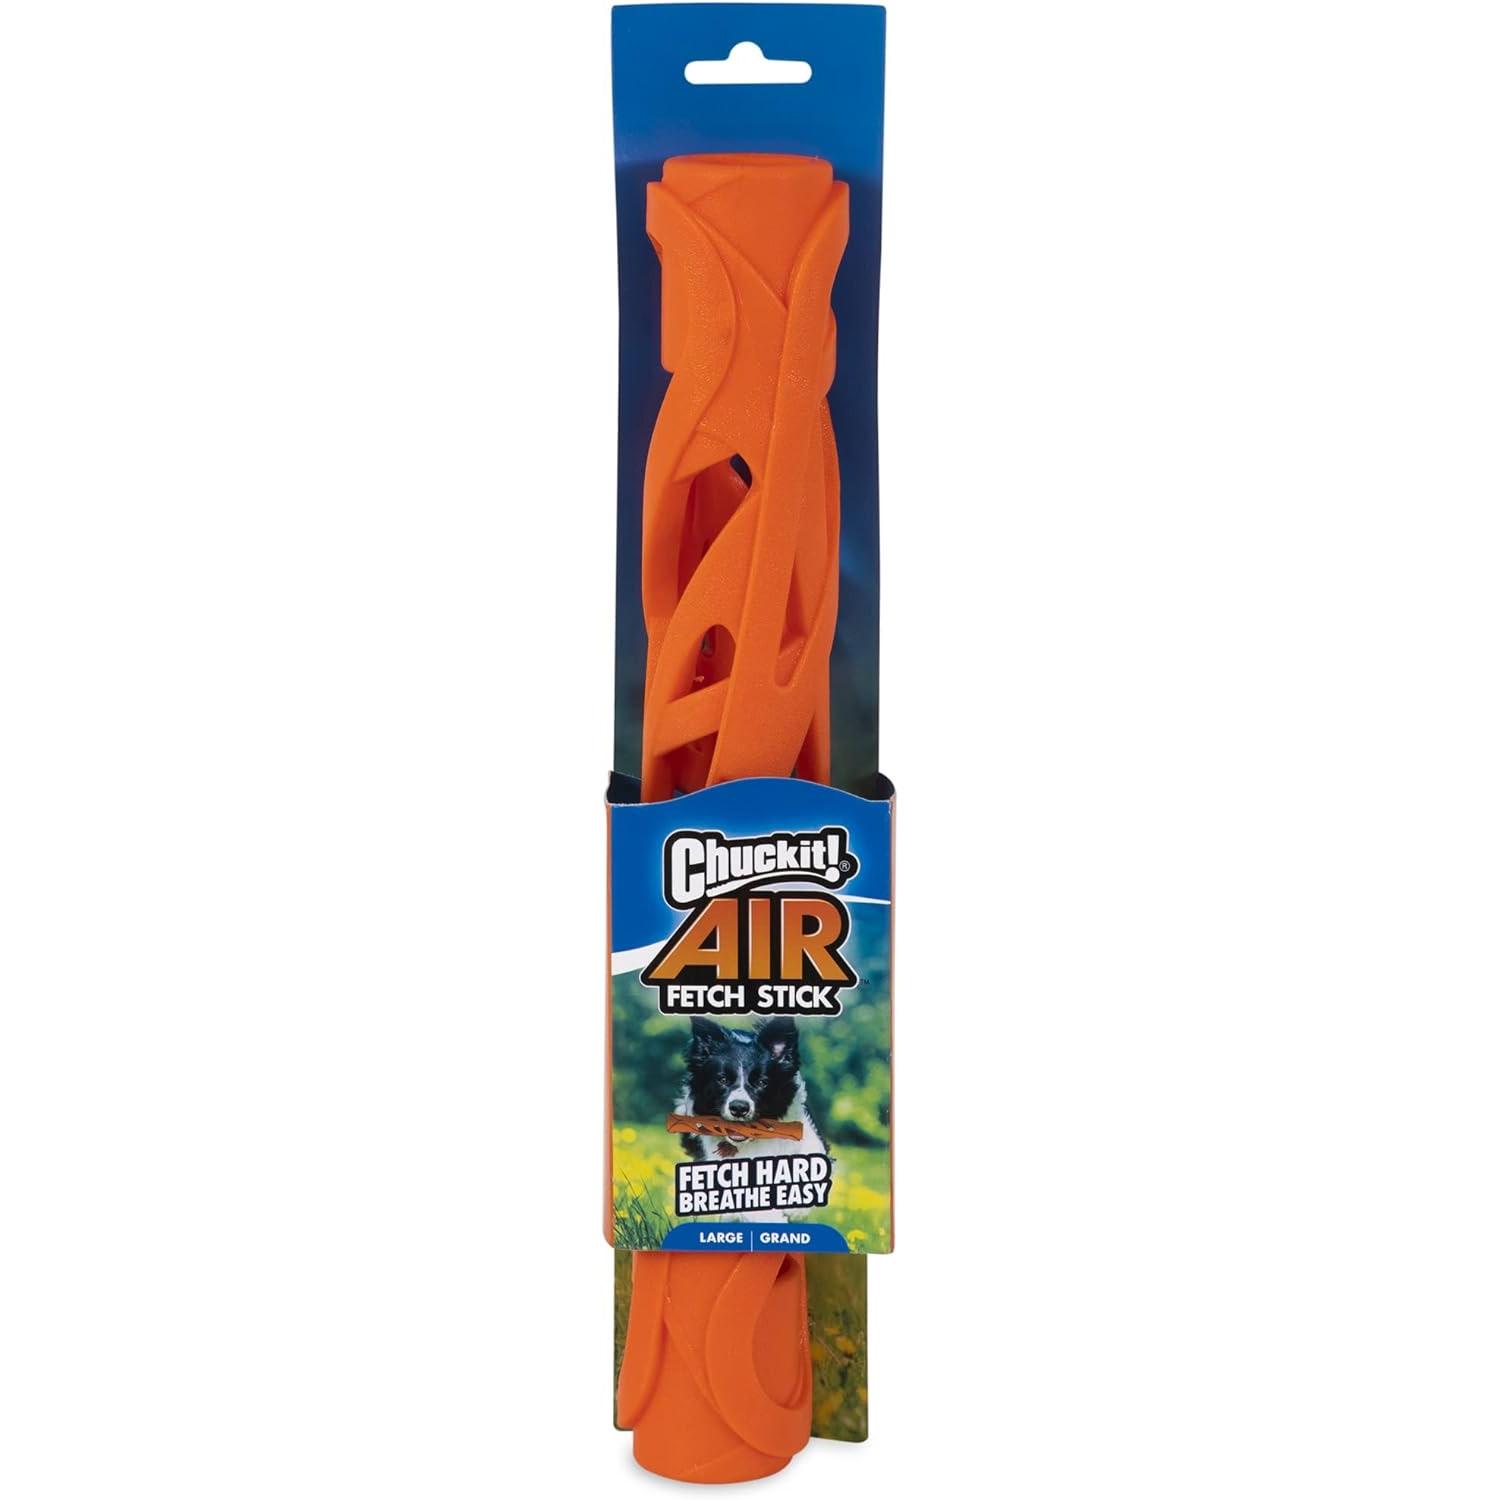 Chuckit Air Fetch Stick Dog Toy for $4.37